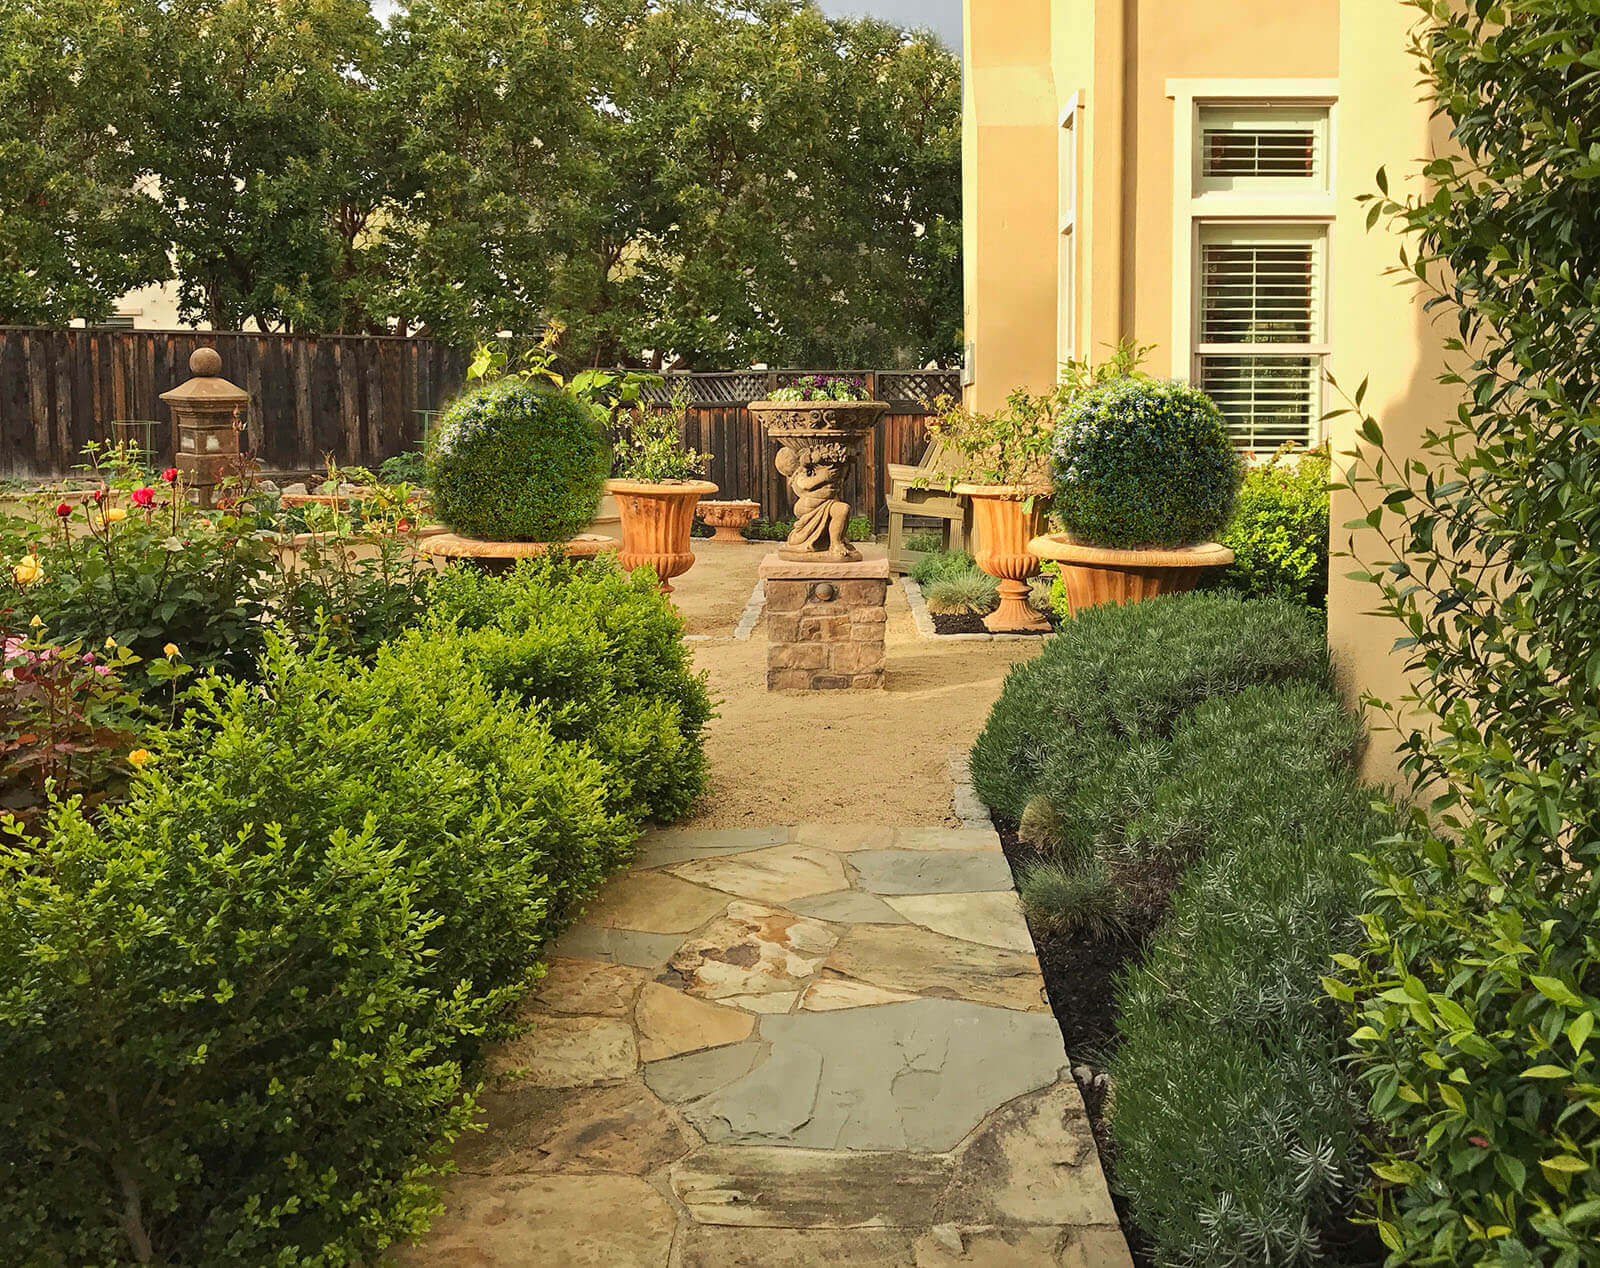 Pathway - Stone laid tile leading to gravel path and centerpiece of yard with pottery at corners